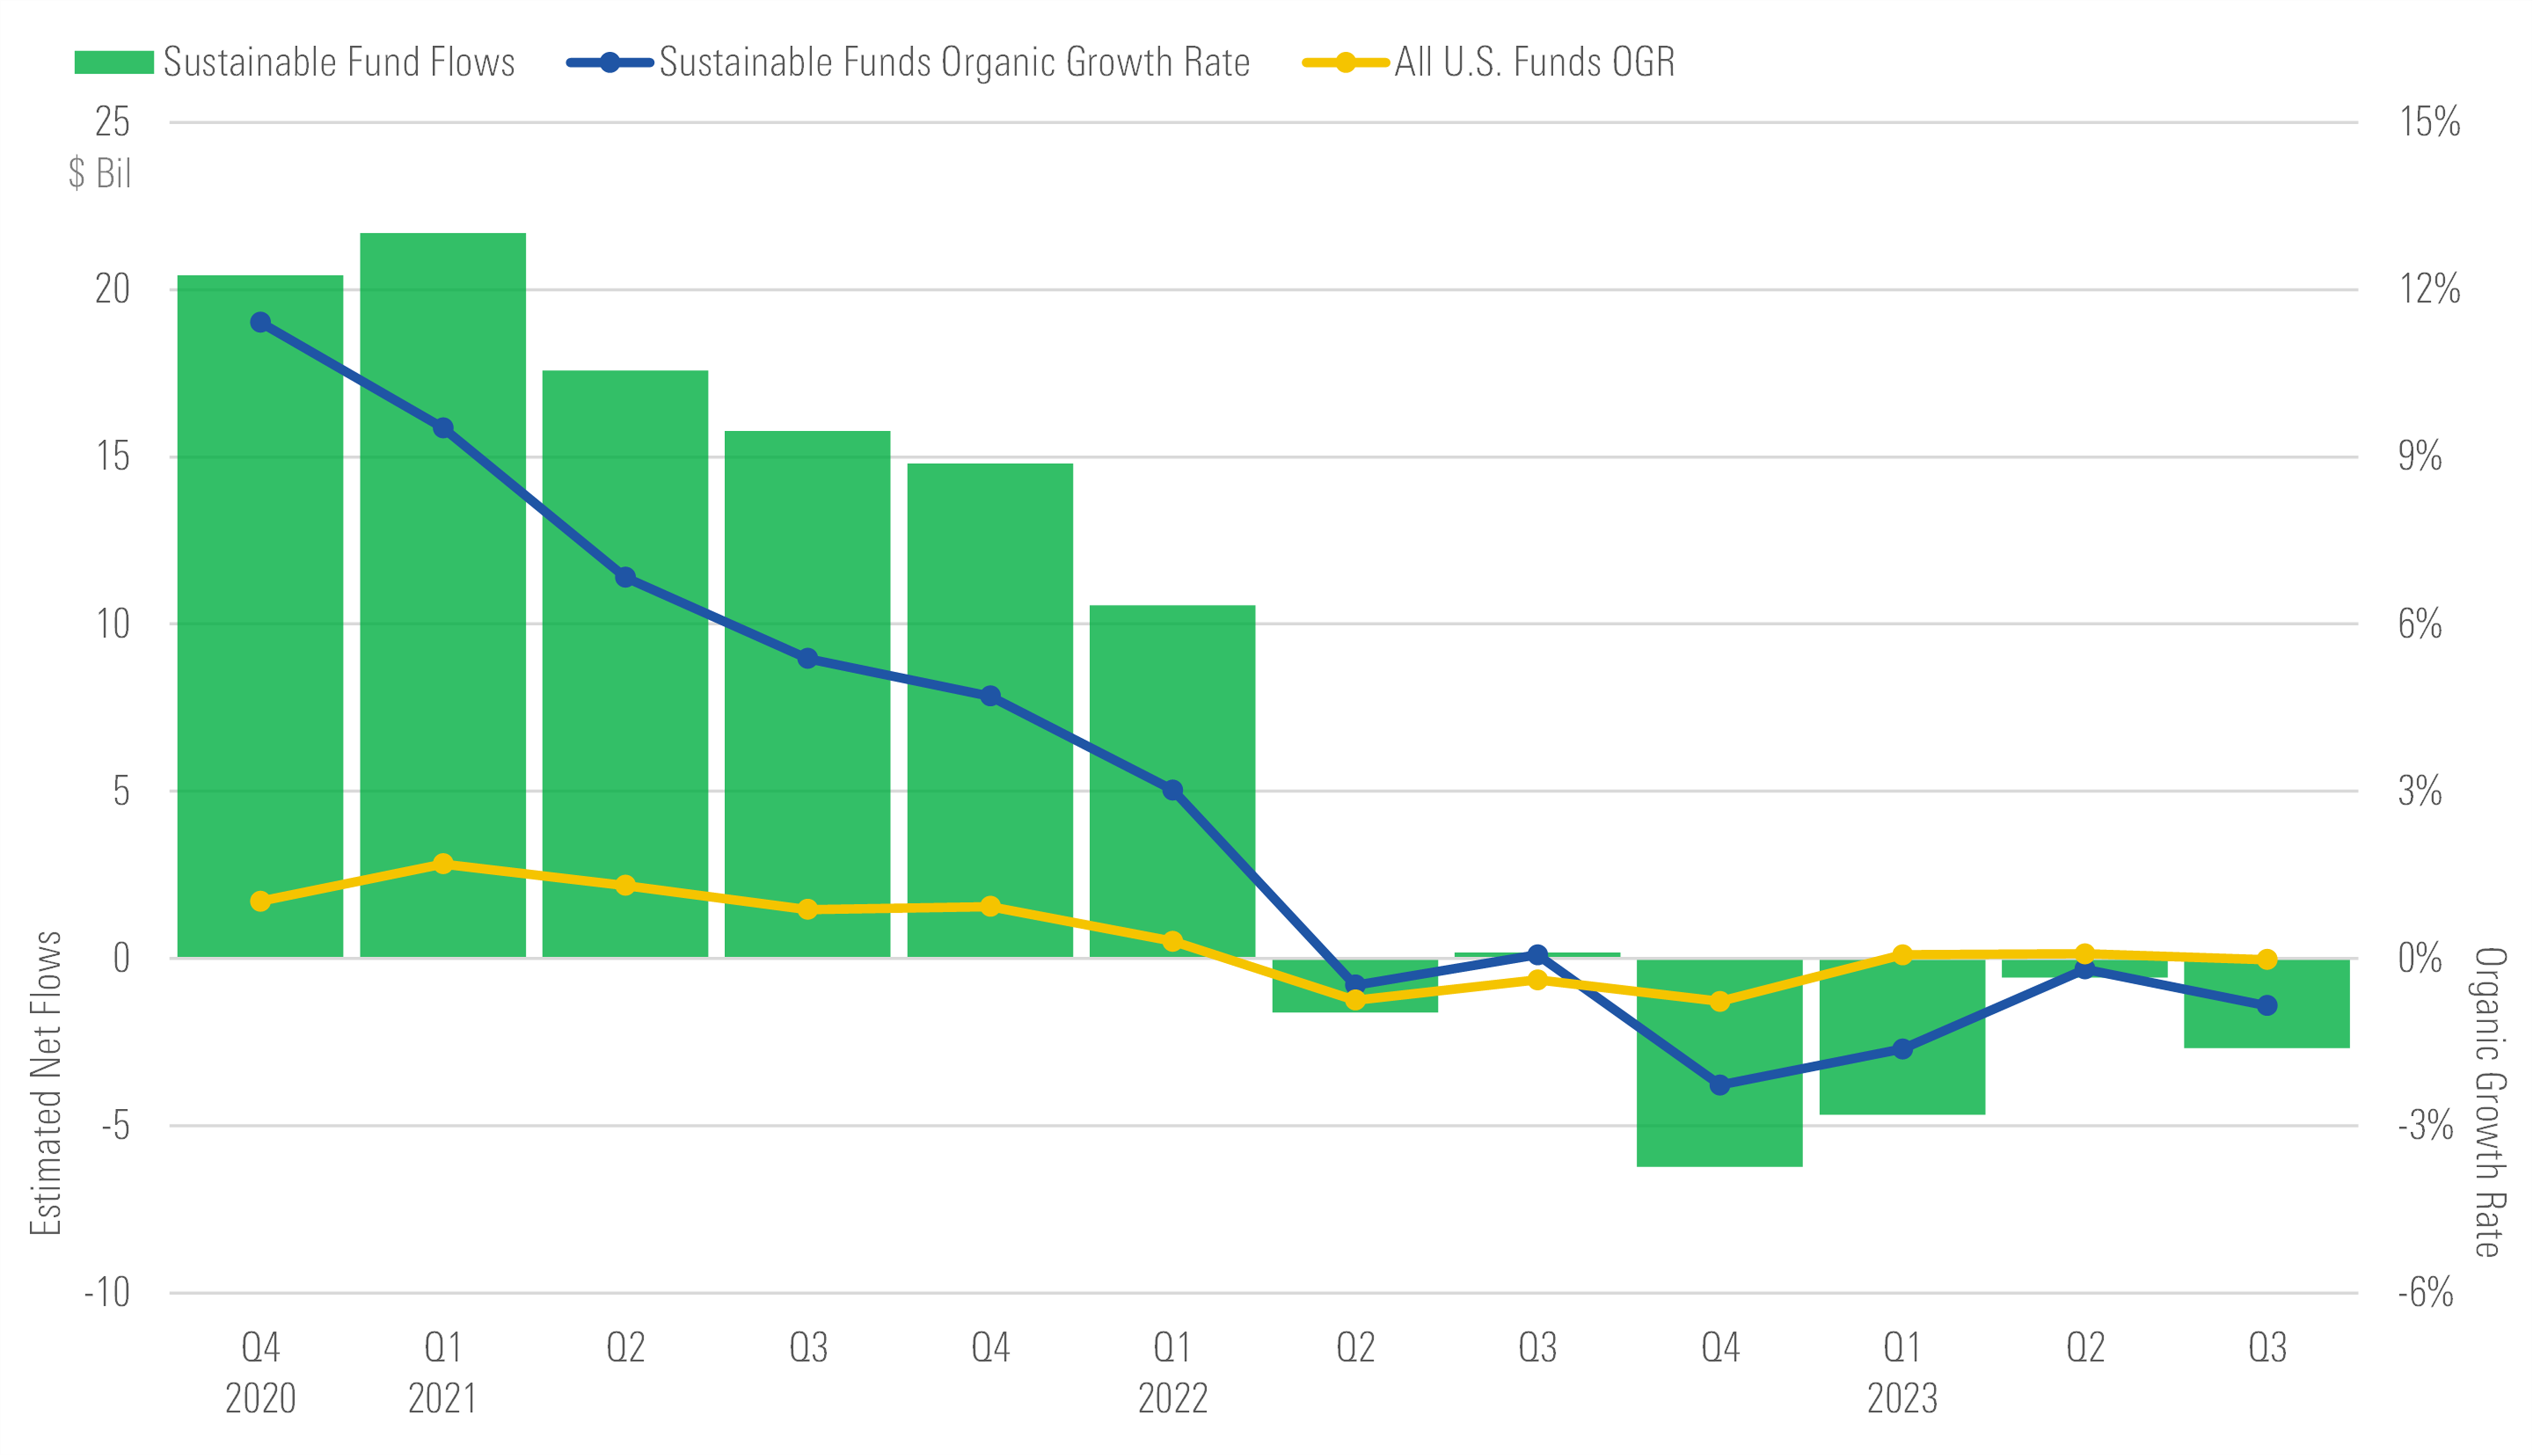 Bar chart showing flows into sustainable funds and organic growth rates of sustainable vs. all U.S. funds